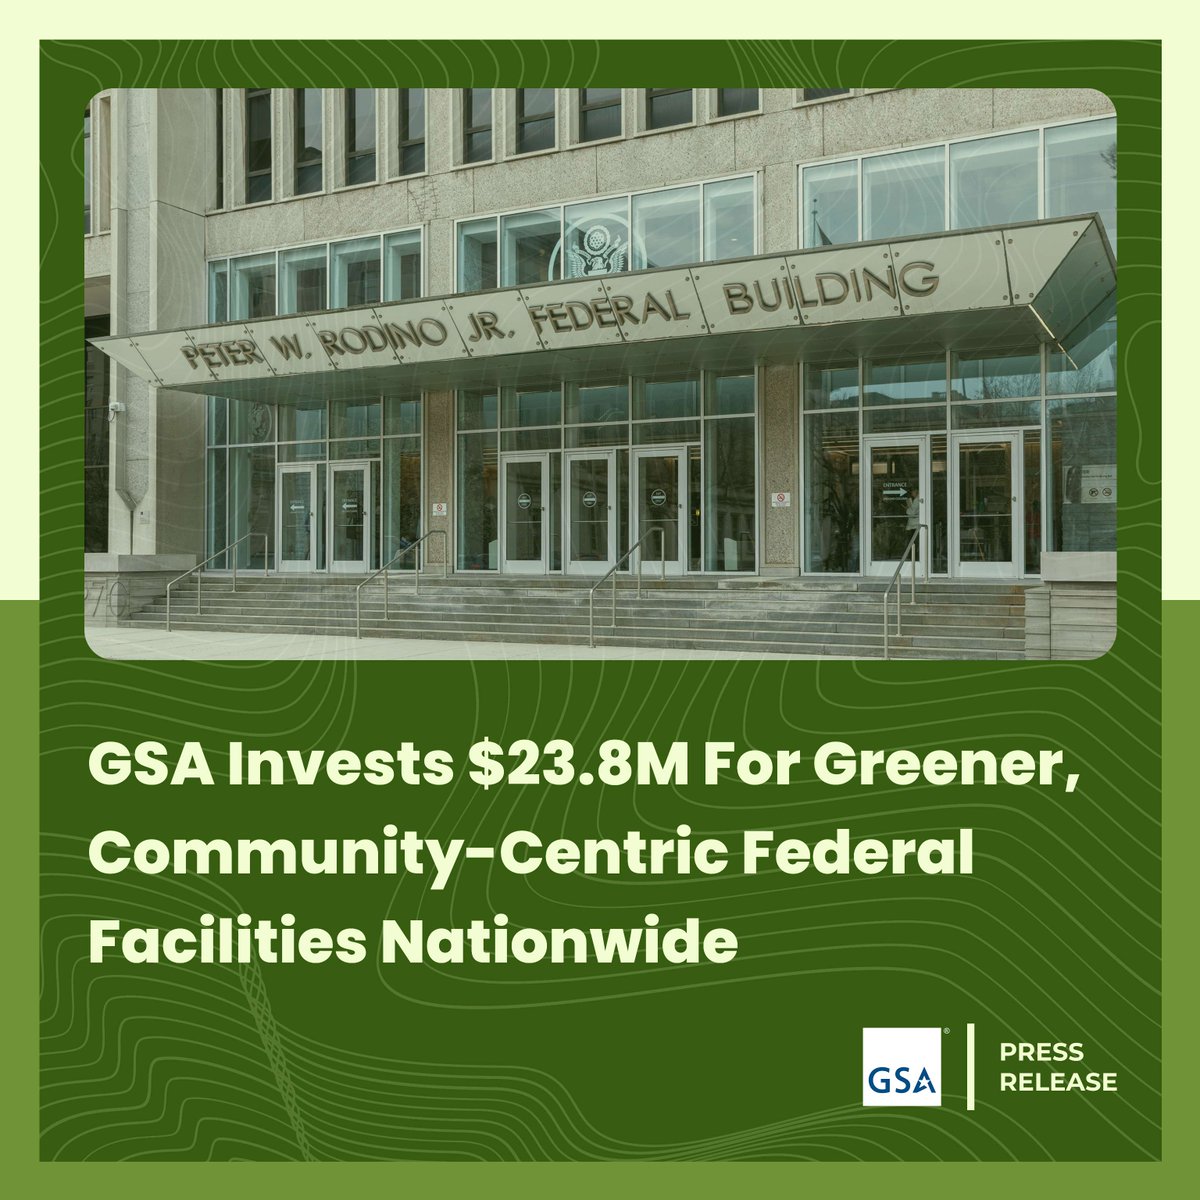 @USGSA is announcing $23.8M for 13 projects through GSA's Good Neighbor Program and the #InflationReductionAct, improving building sustainability & benefiting communities across 10 states. ow.ly/RKiy50Rehom